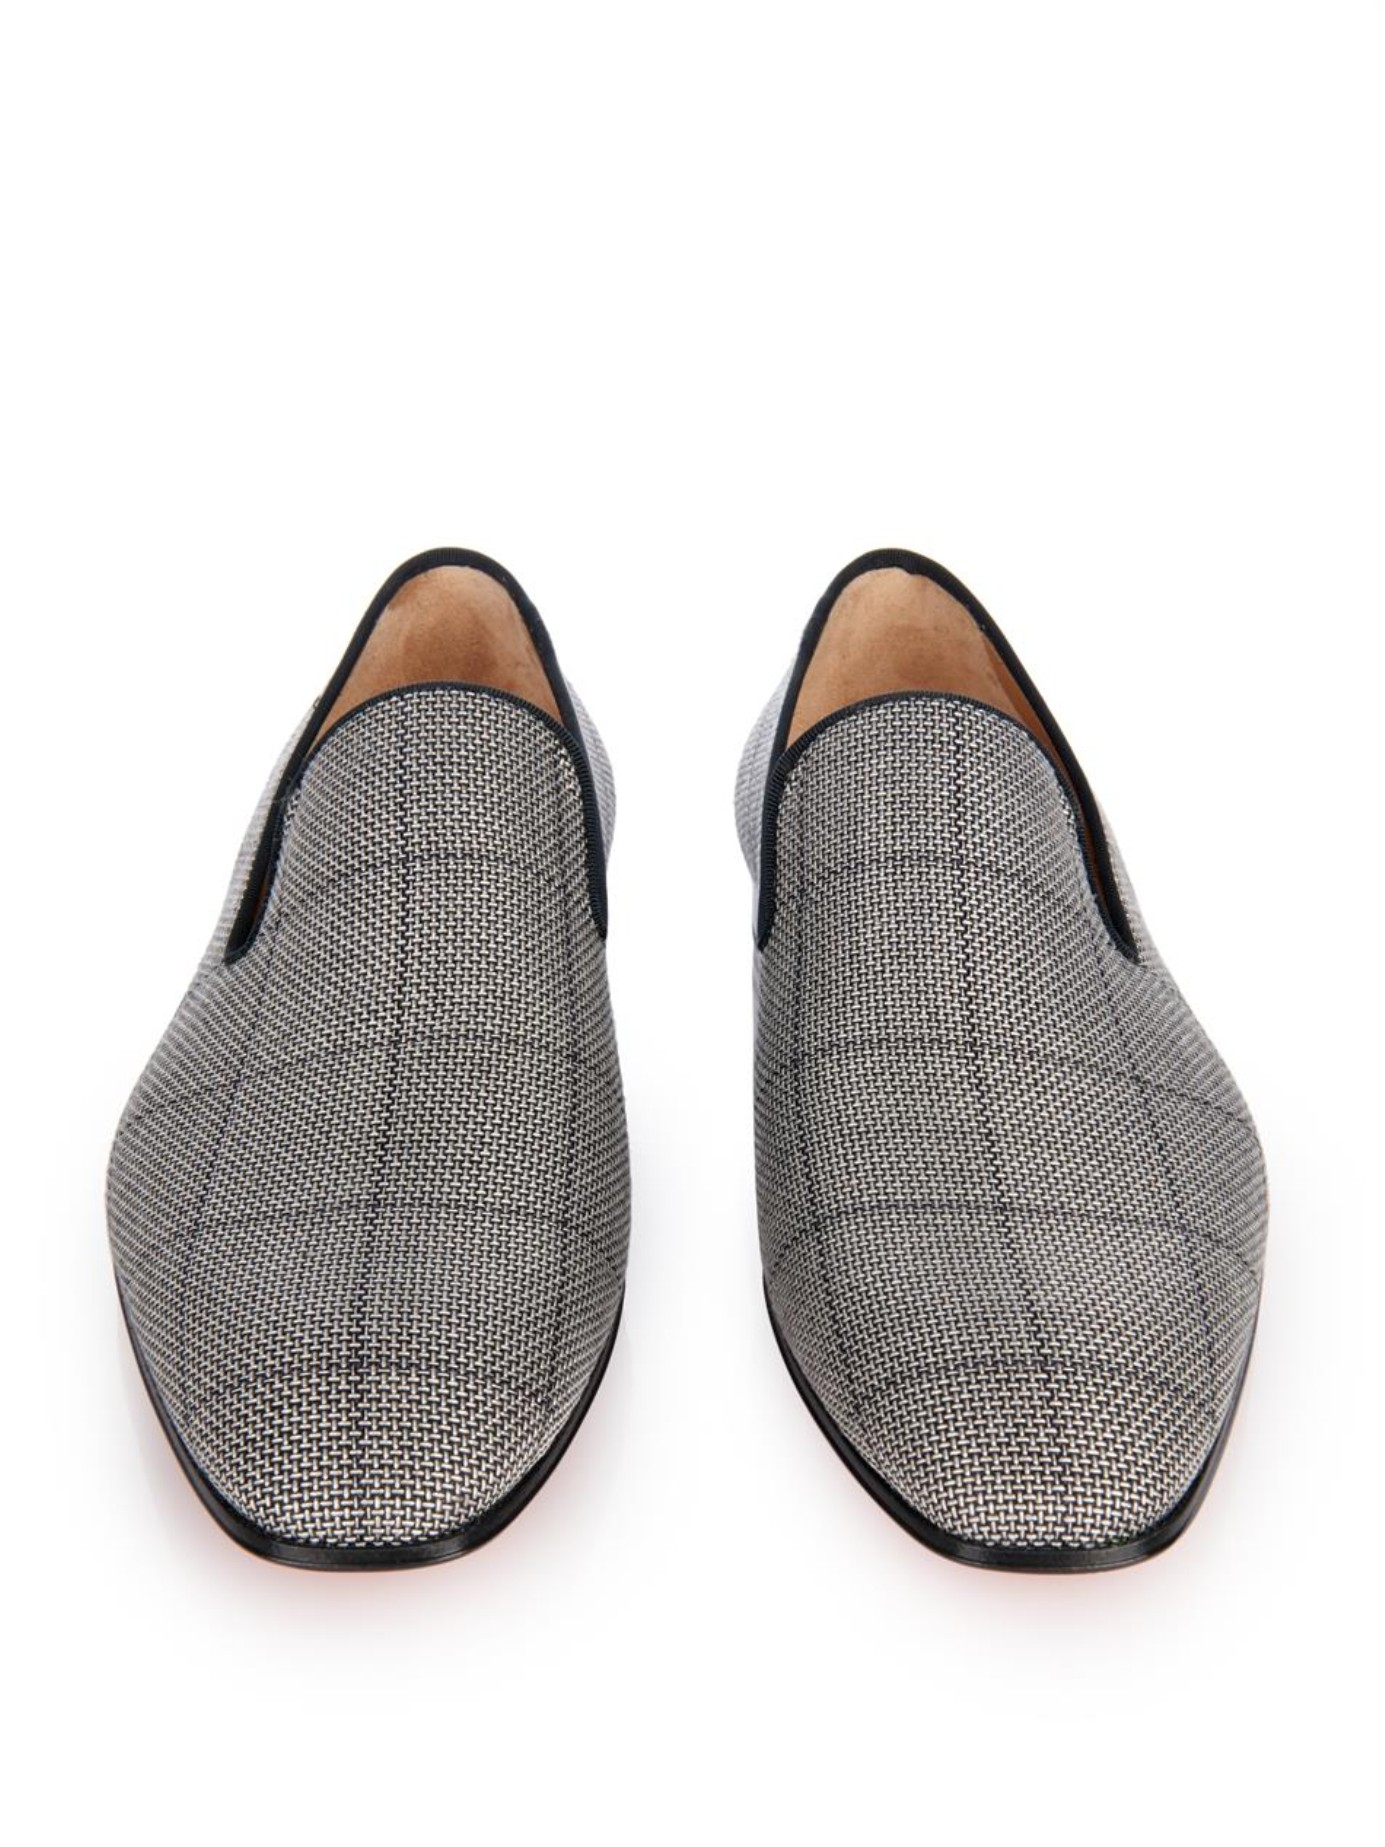 Christian louboutin Dandelion Woven-Check Loafers in Gray for Men ...